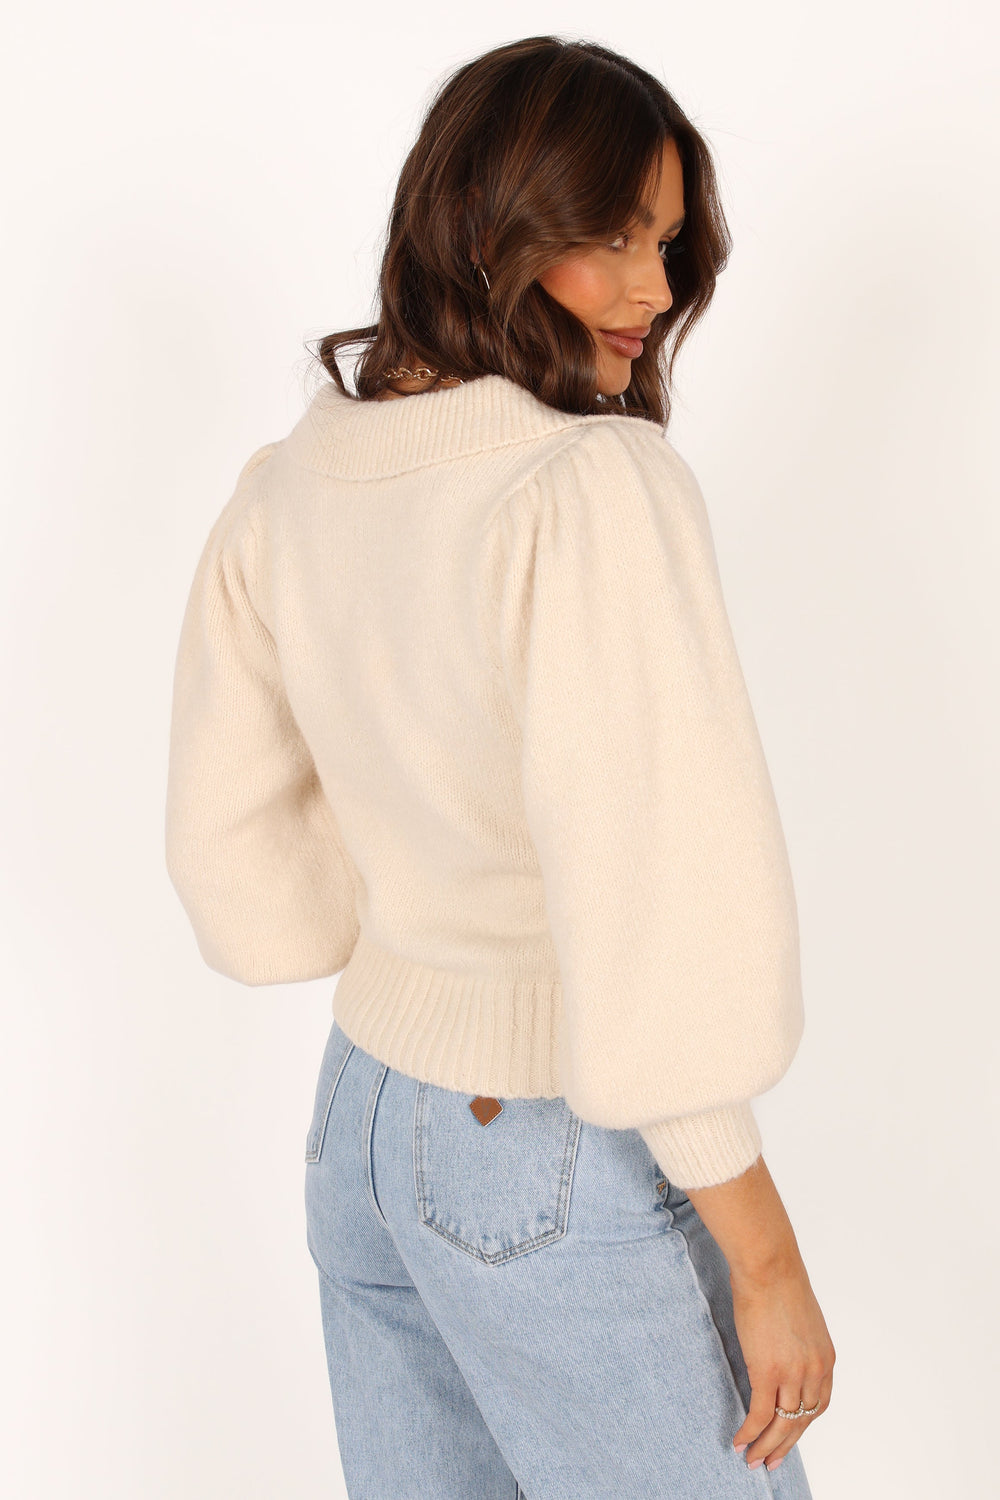 Petal and Pup USA KNITWEAR Kahlani Button Front Knit Sweater - Cream